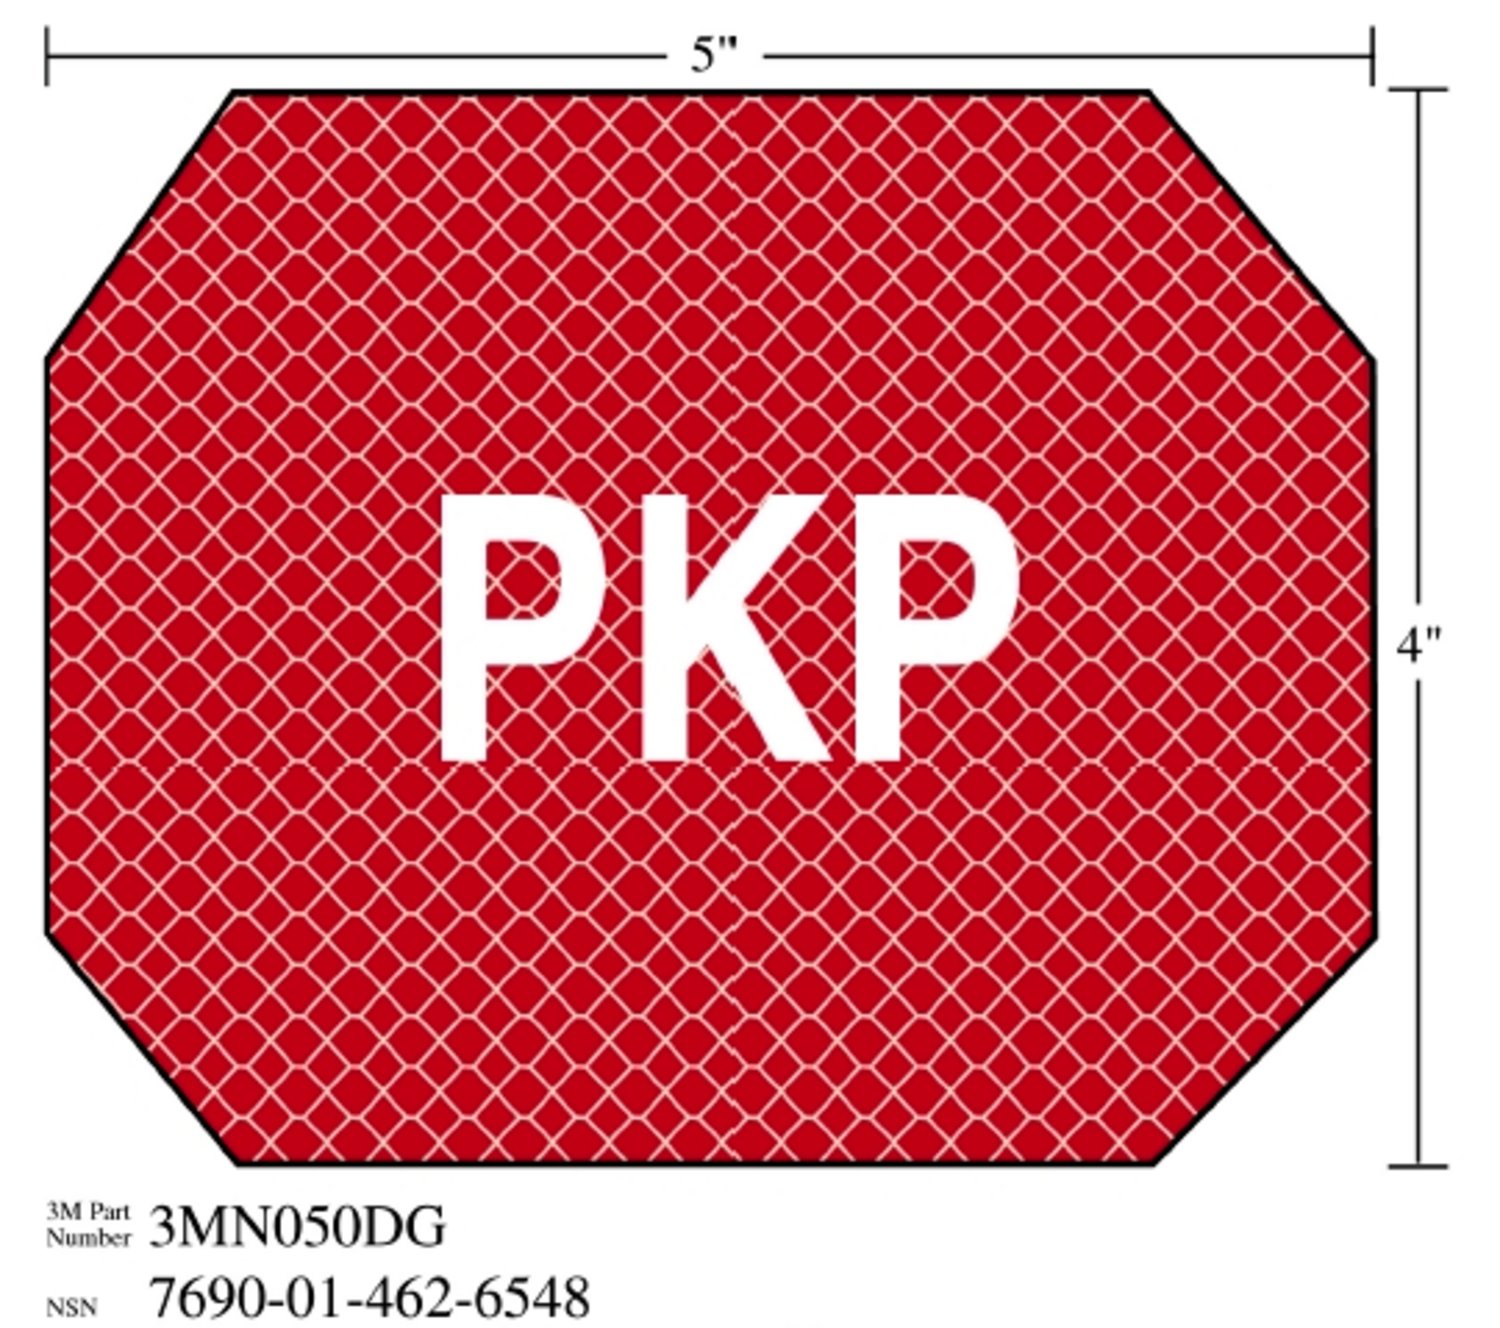 7010388686 - 3M Diamond Grade Damage Control Sign 3MN050DG, "PKP", 5 in x 4 in,
10/Package